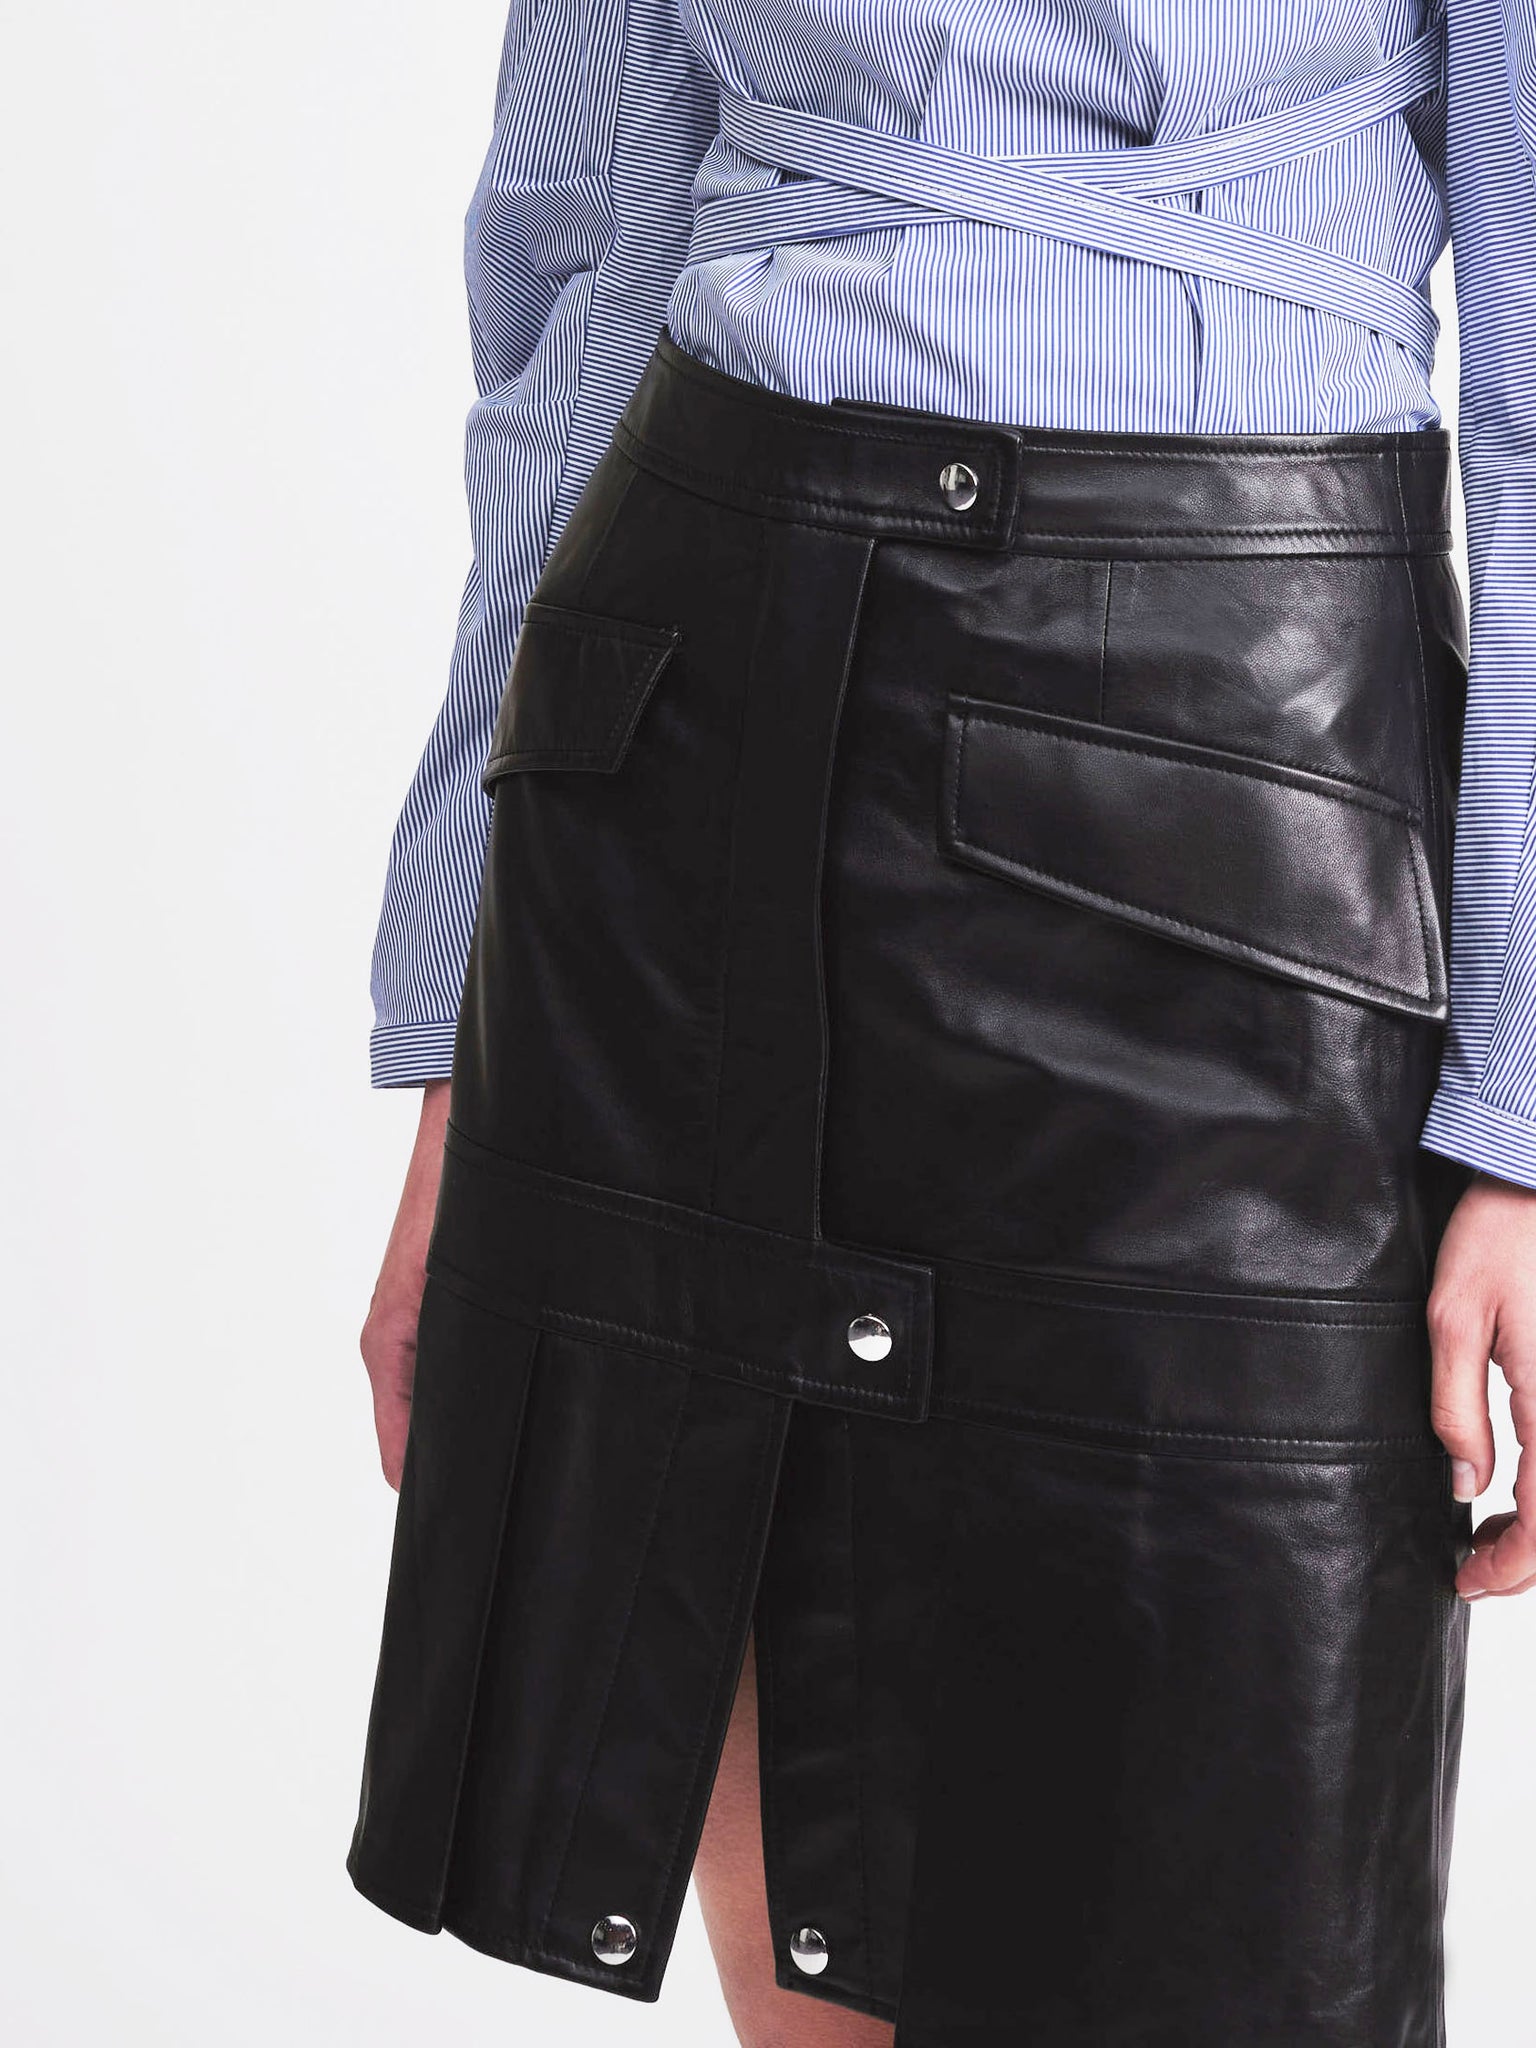 Snapped Leather Pleats Skirt - whoami